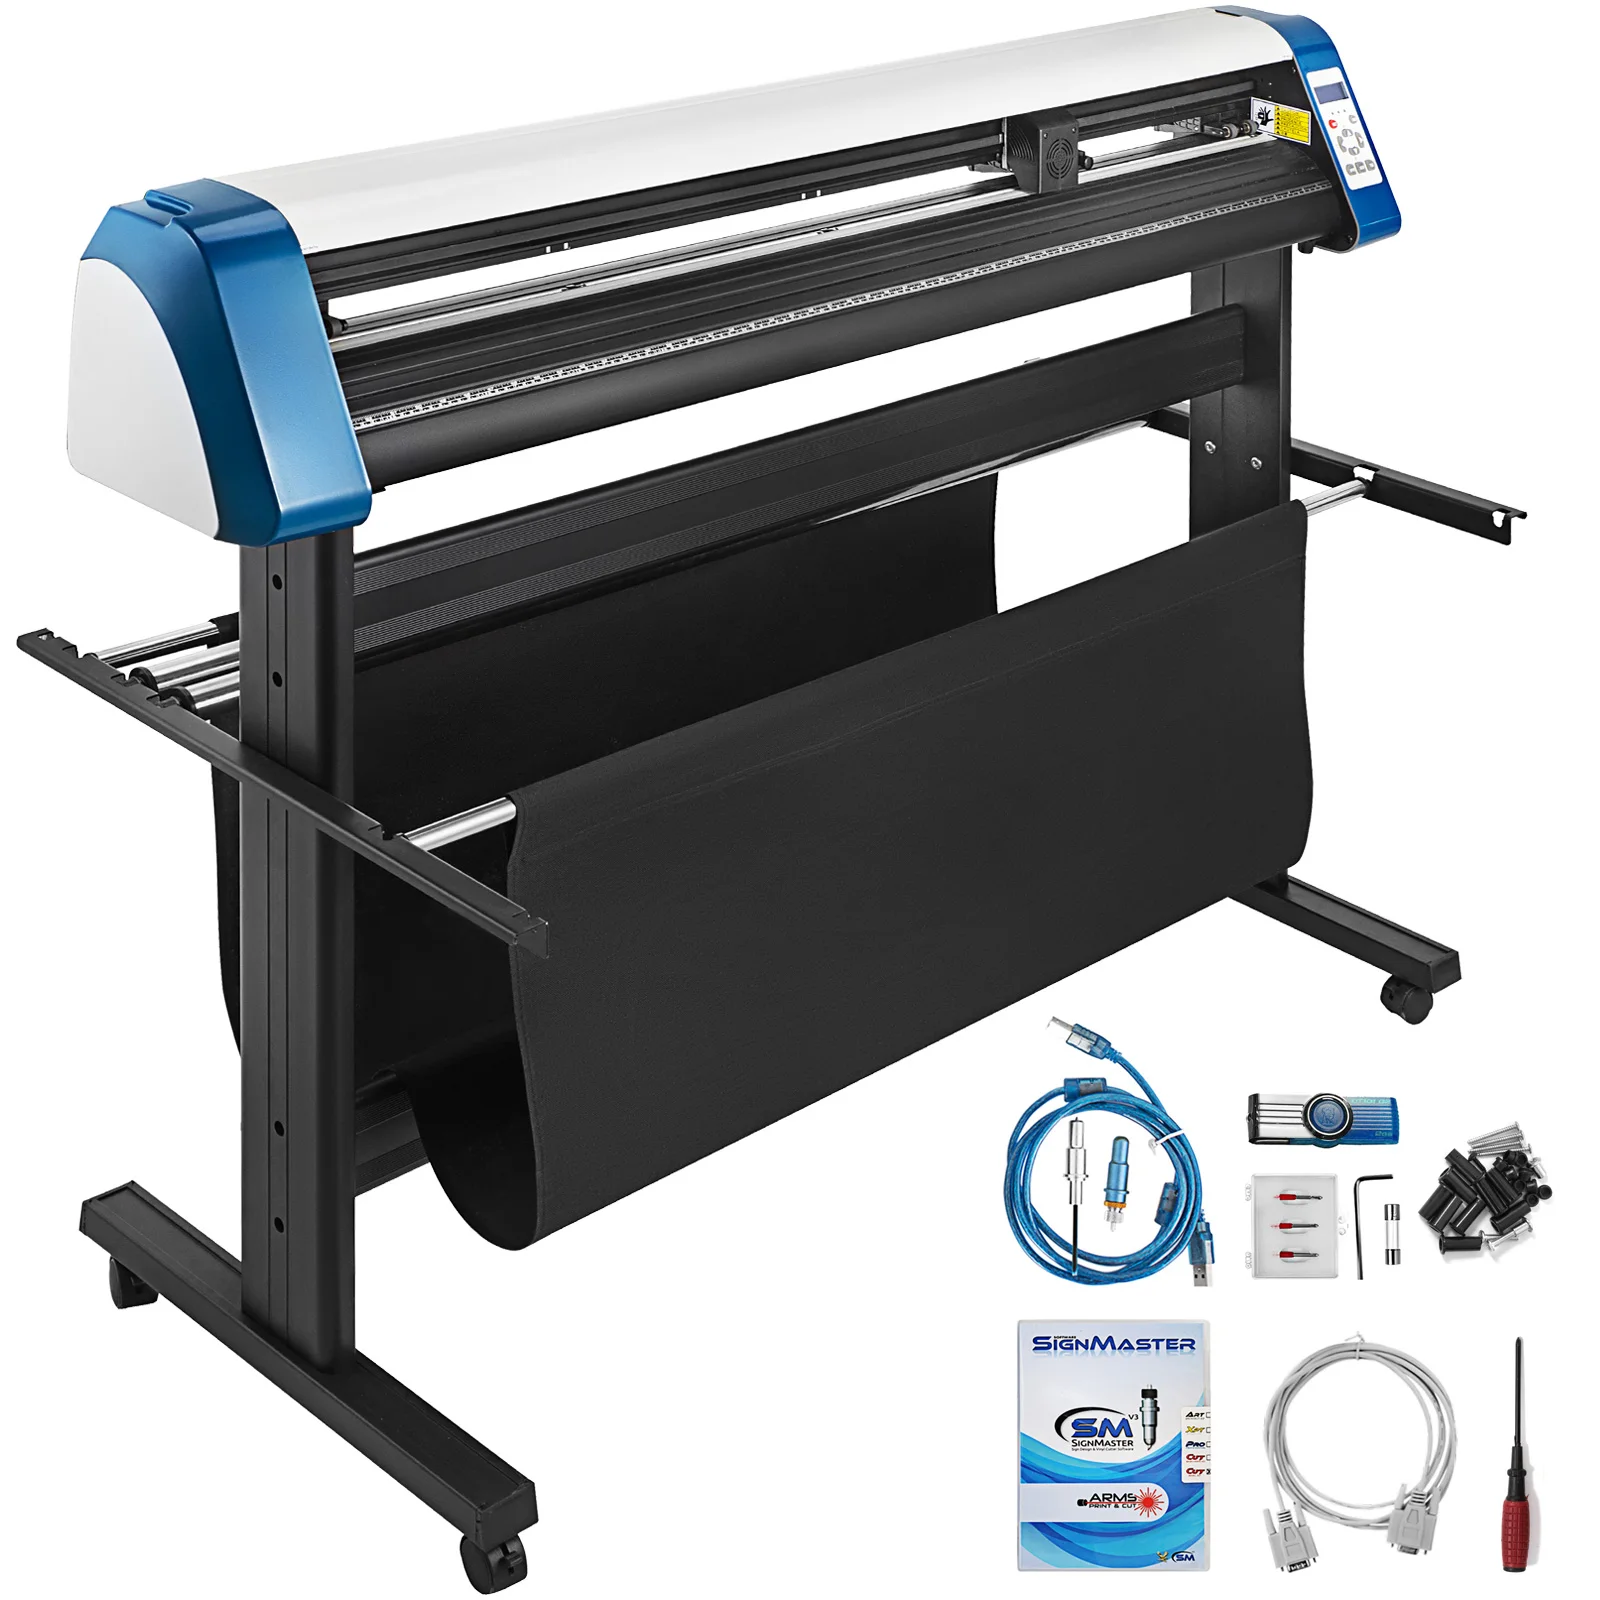 VEVOR 53 Inch Vinyl Cutter Plotter Sign Cutting Machine Signmaster Software with 3 Blades LCD Screen for Advertising Printing